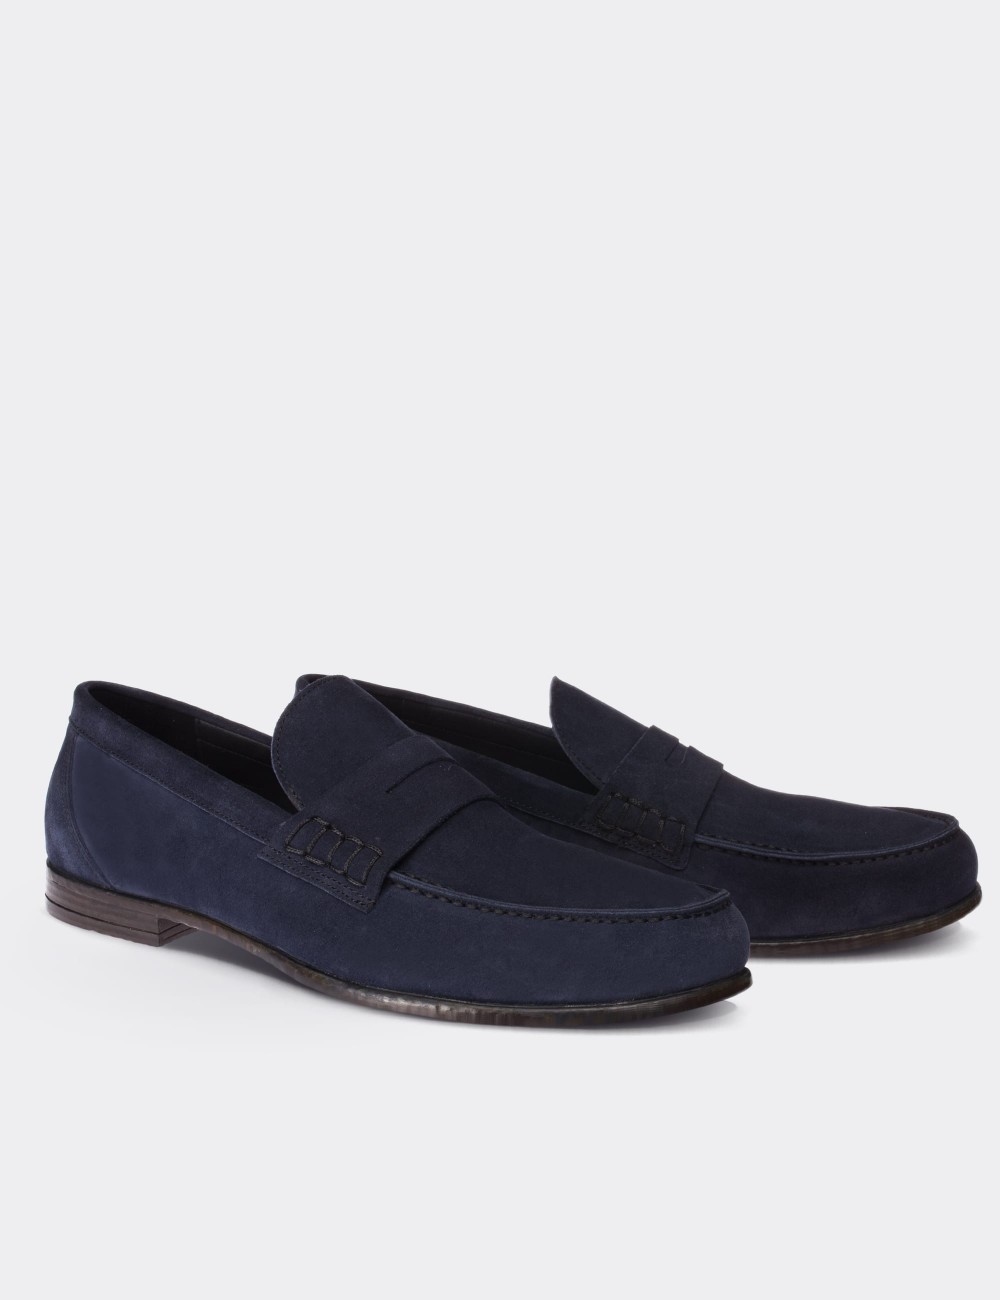 Navy Suede Leather Loafers - 01538MLCVC02